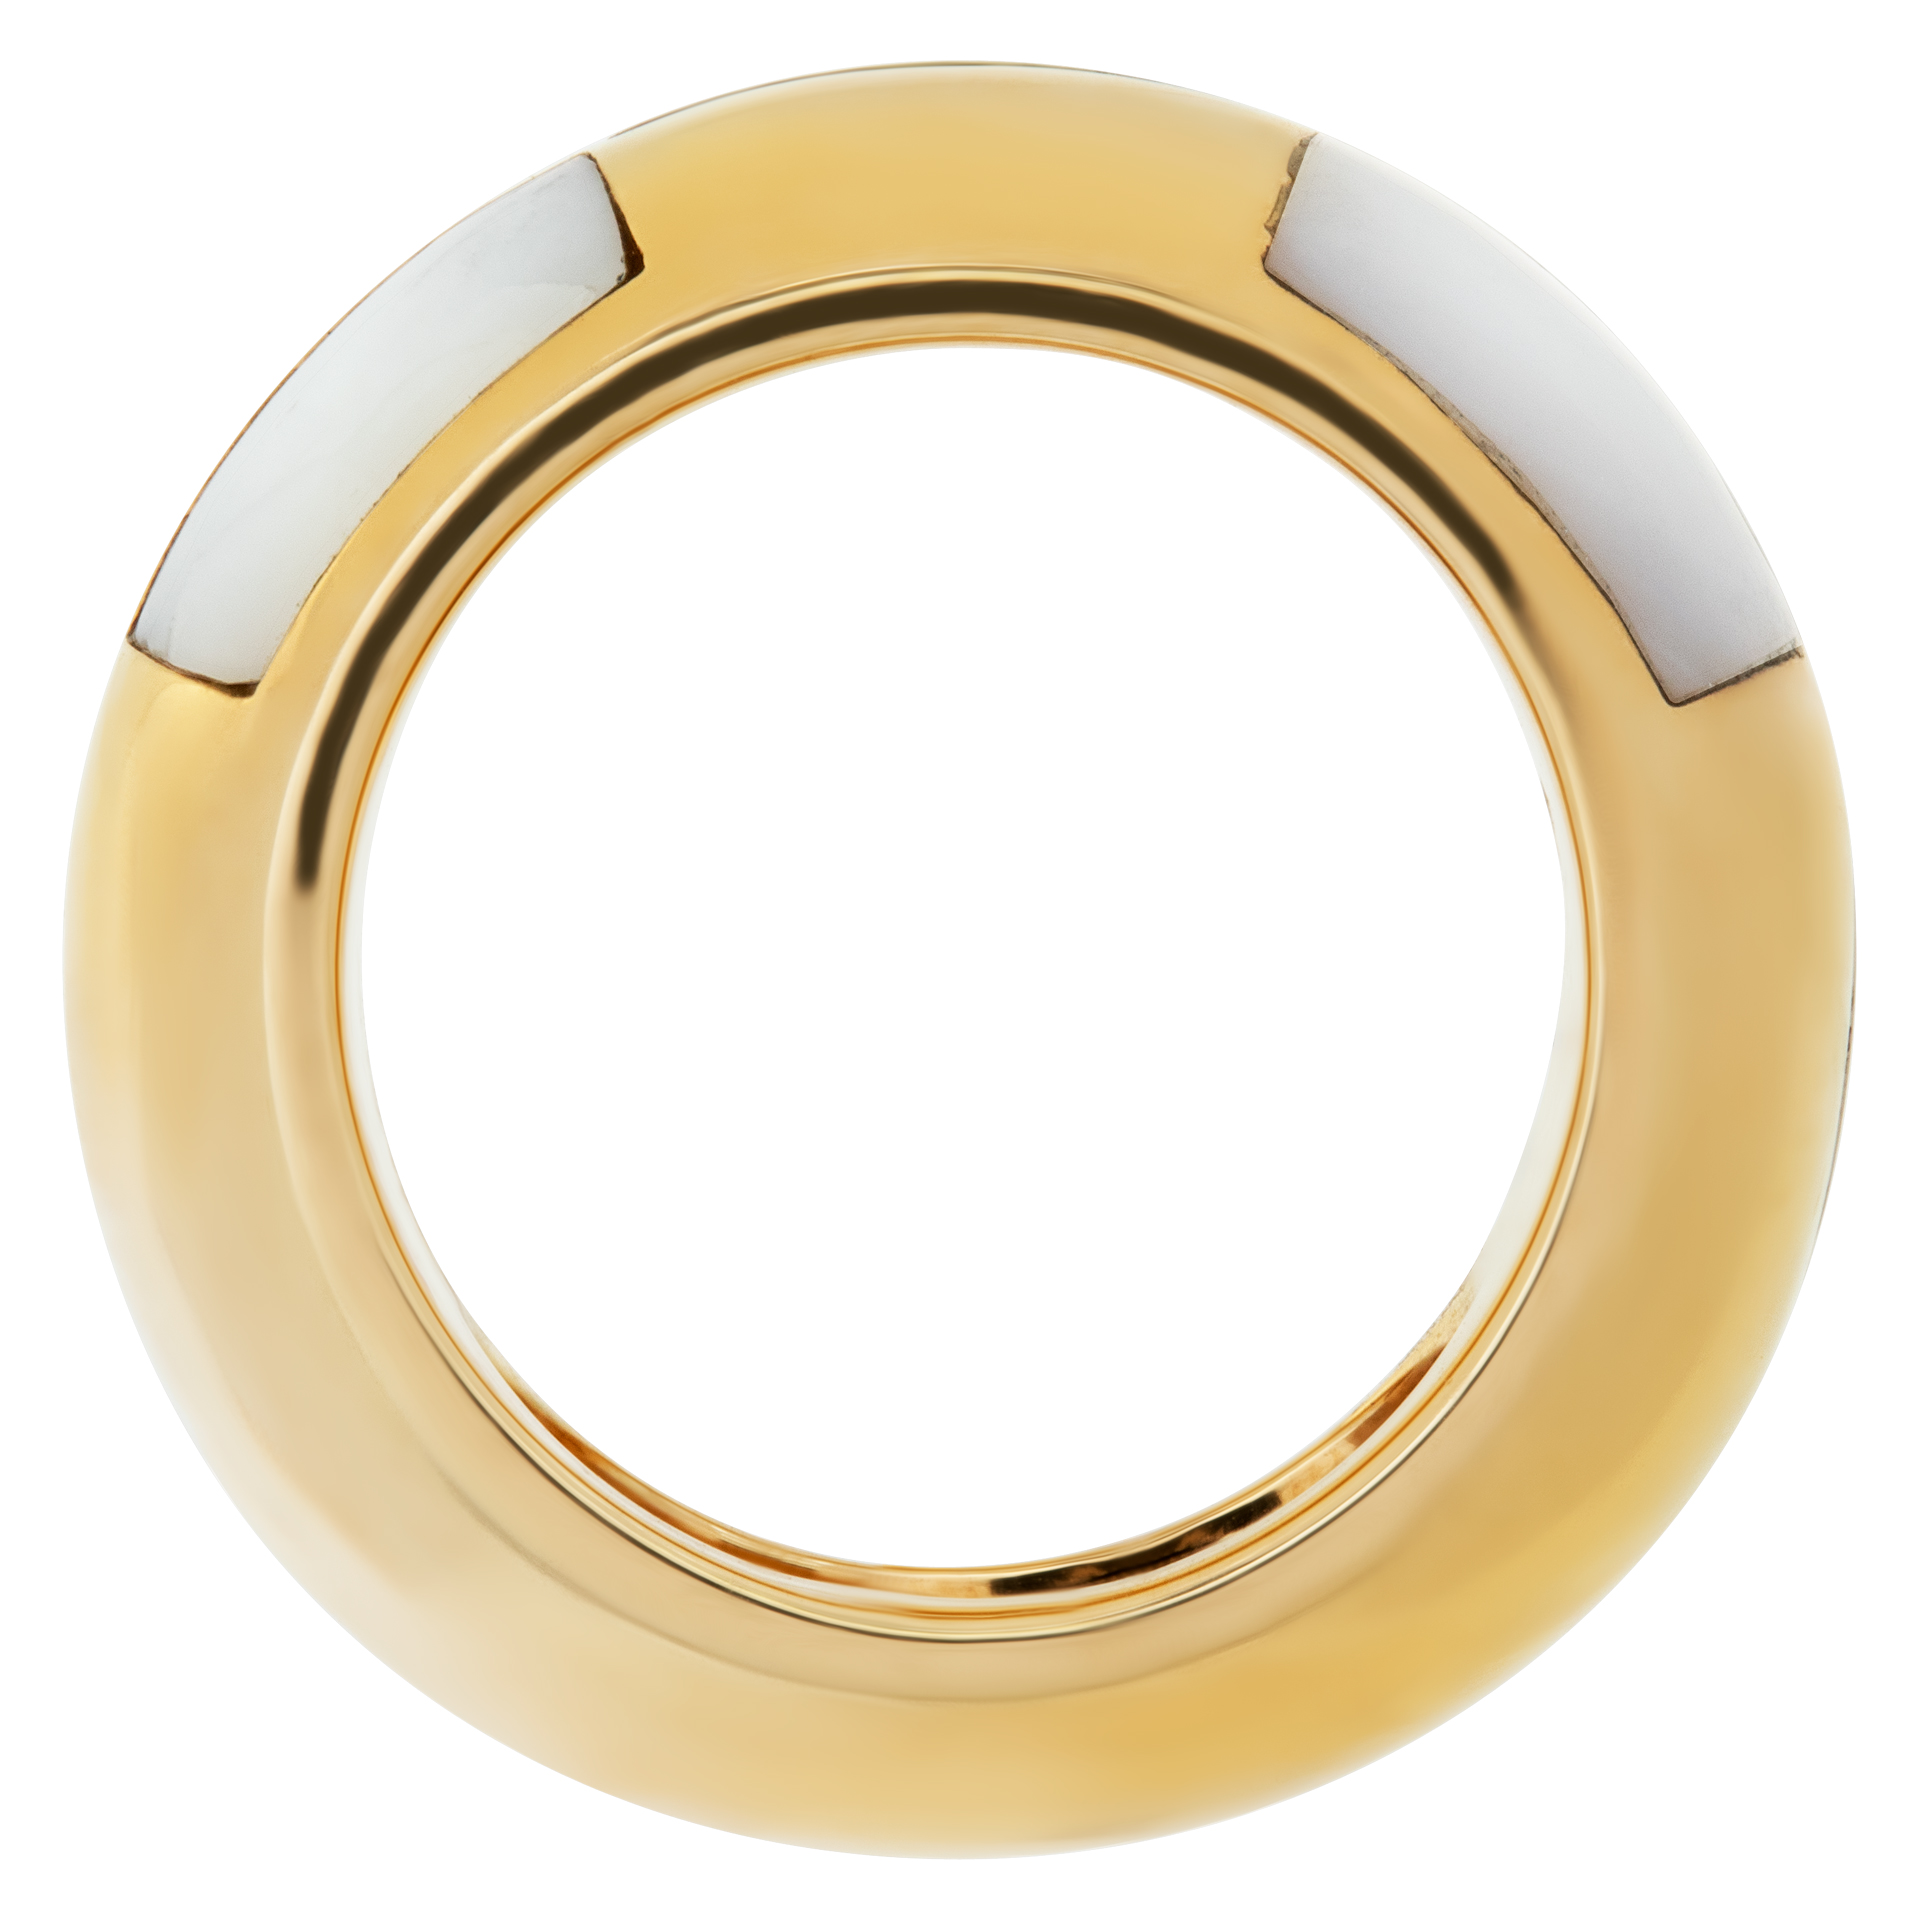 Mauboussin ring in 18k yellow gold with inlaid mother of pearl accents image 4